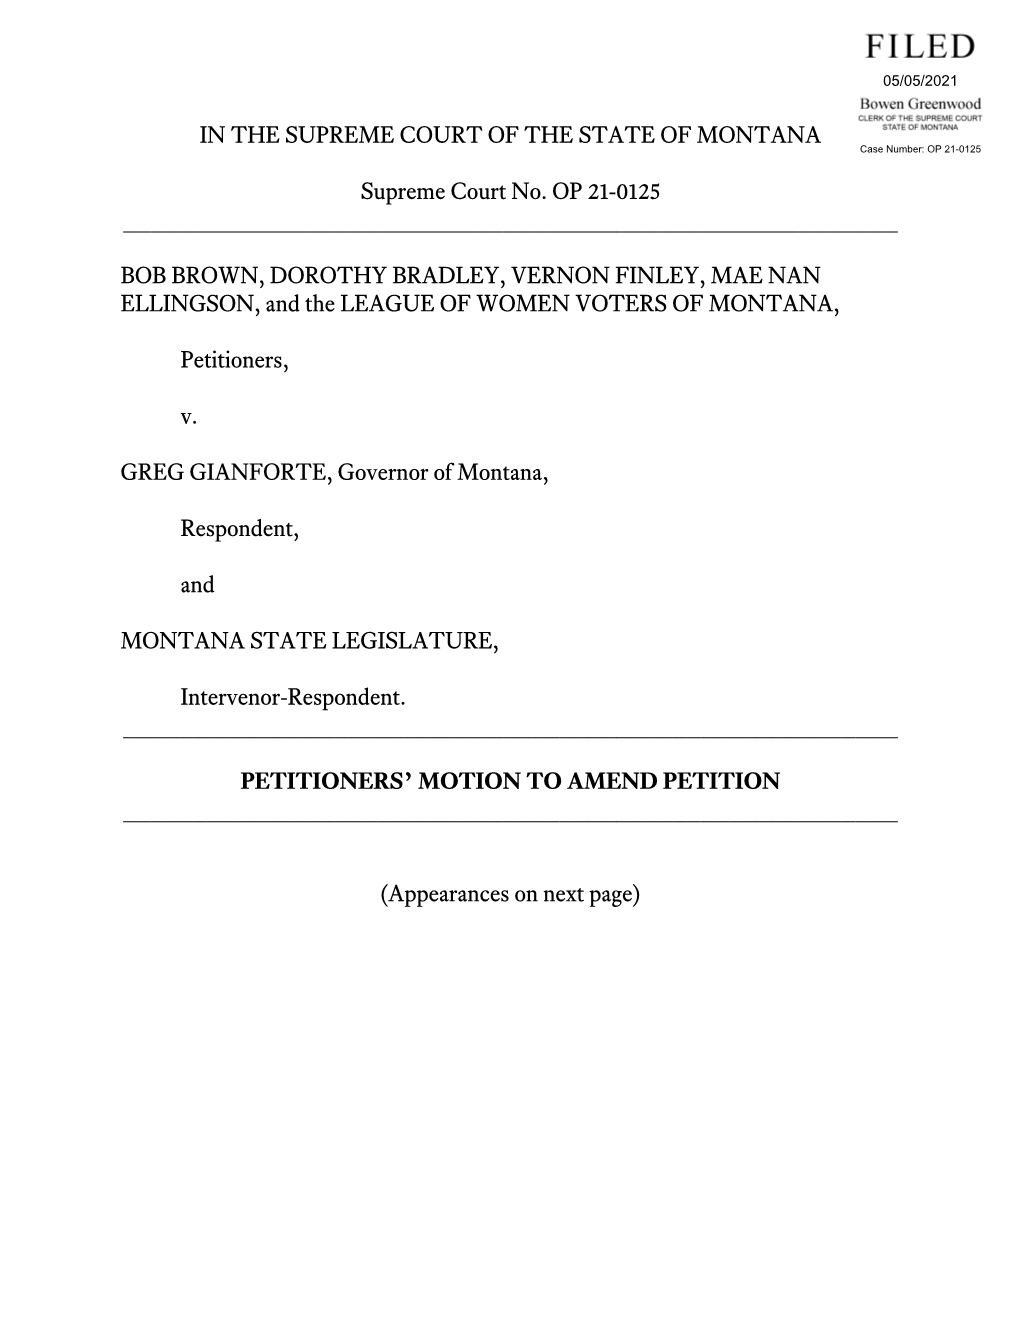 Petitioners' Motion to Amend Petition